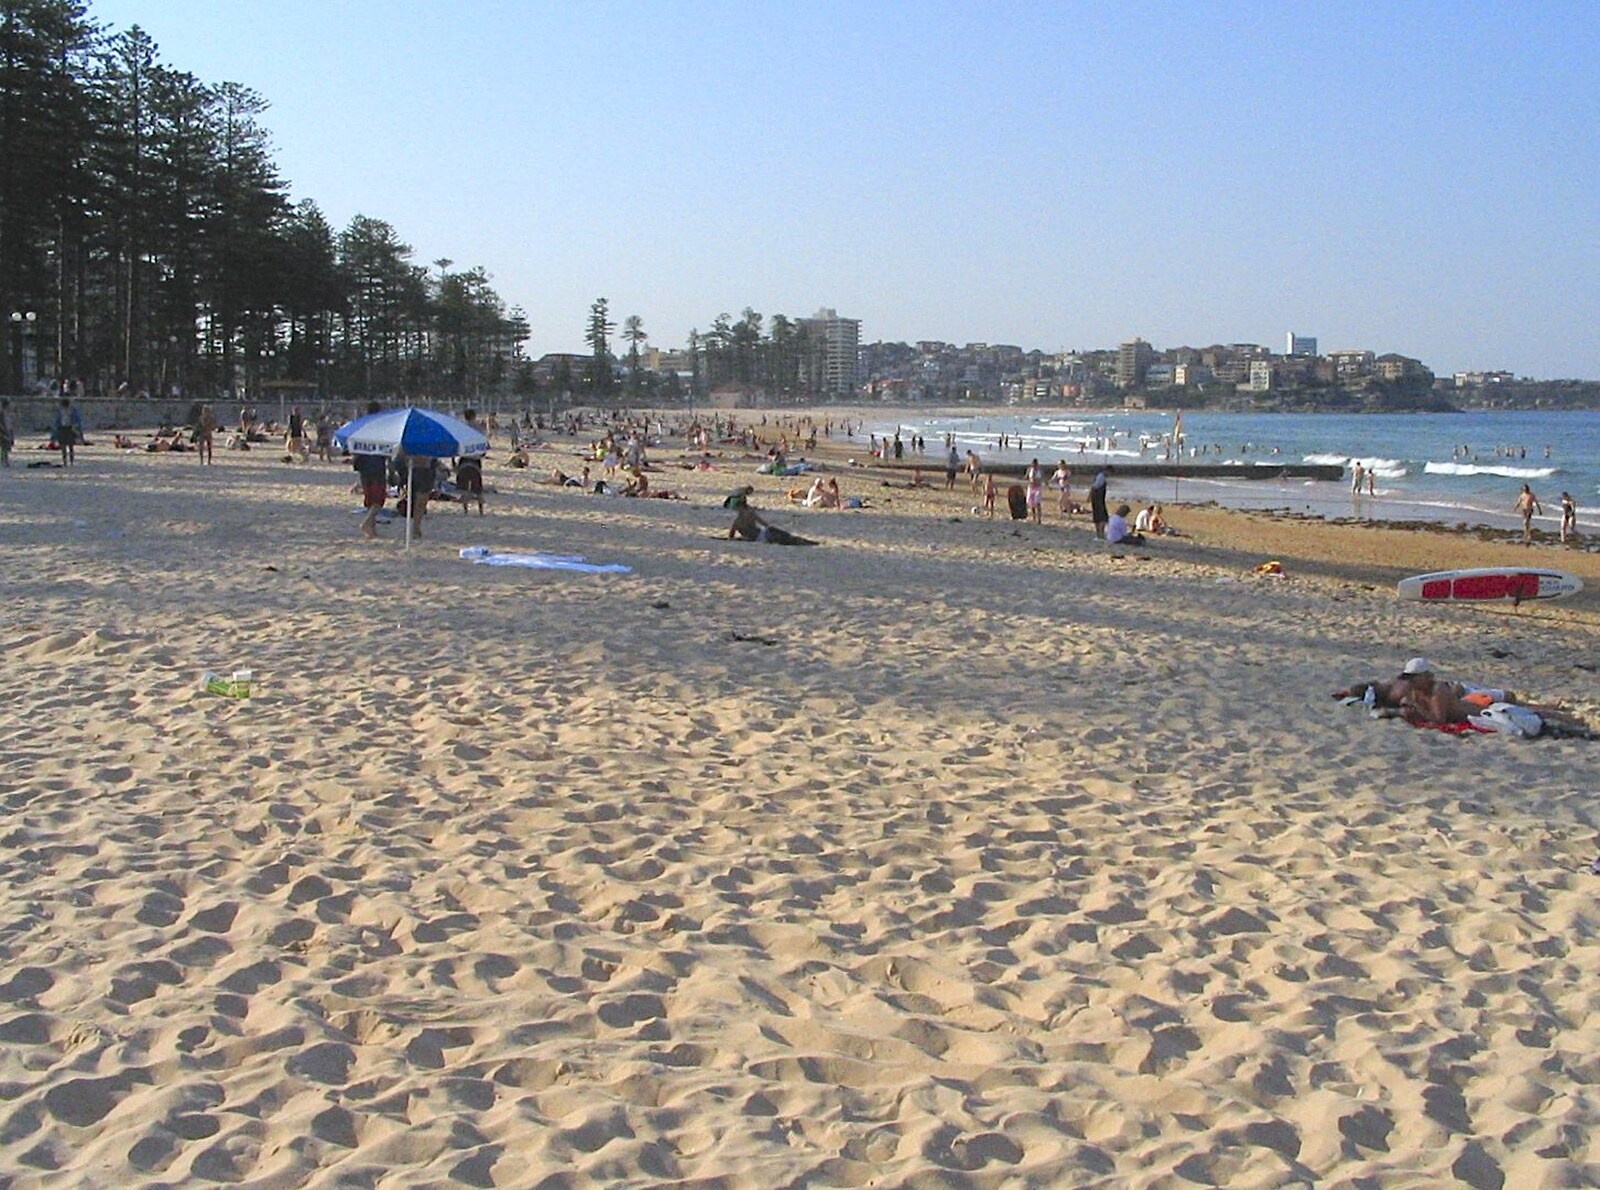 Manly beach from Sydney, New South Wales, Australia - 10th October 2004